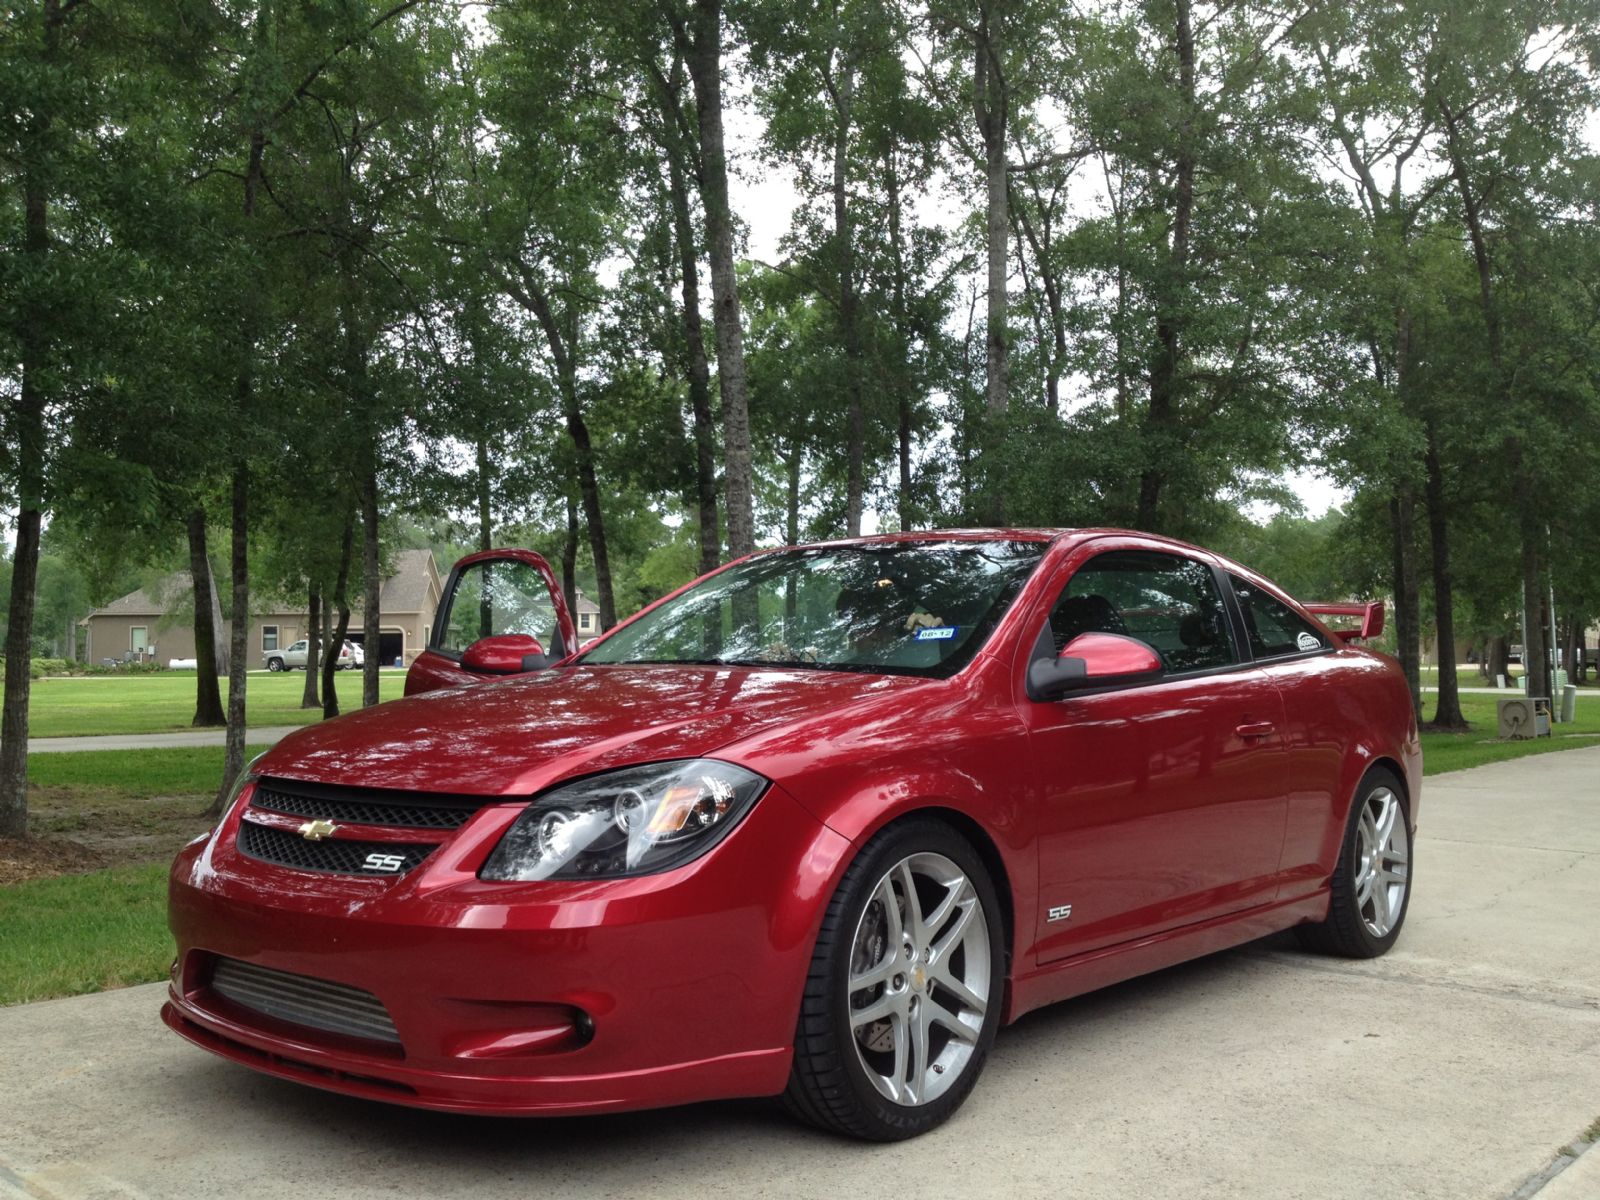 2010 Chevrolet 568 Whp Cobalt Ss Turbocharged For Sale